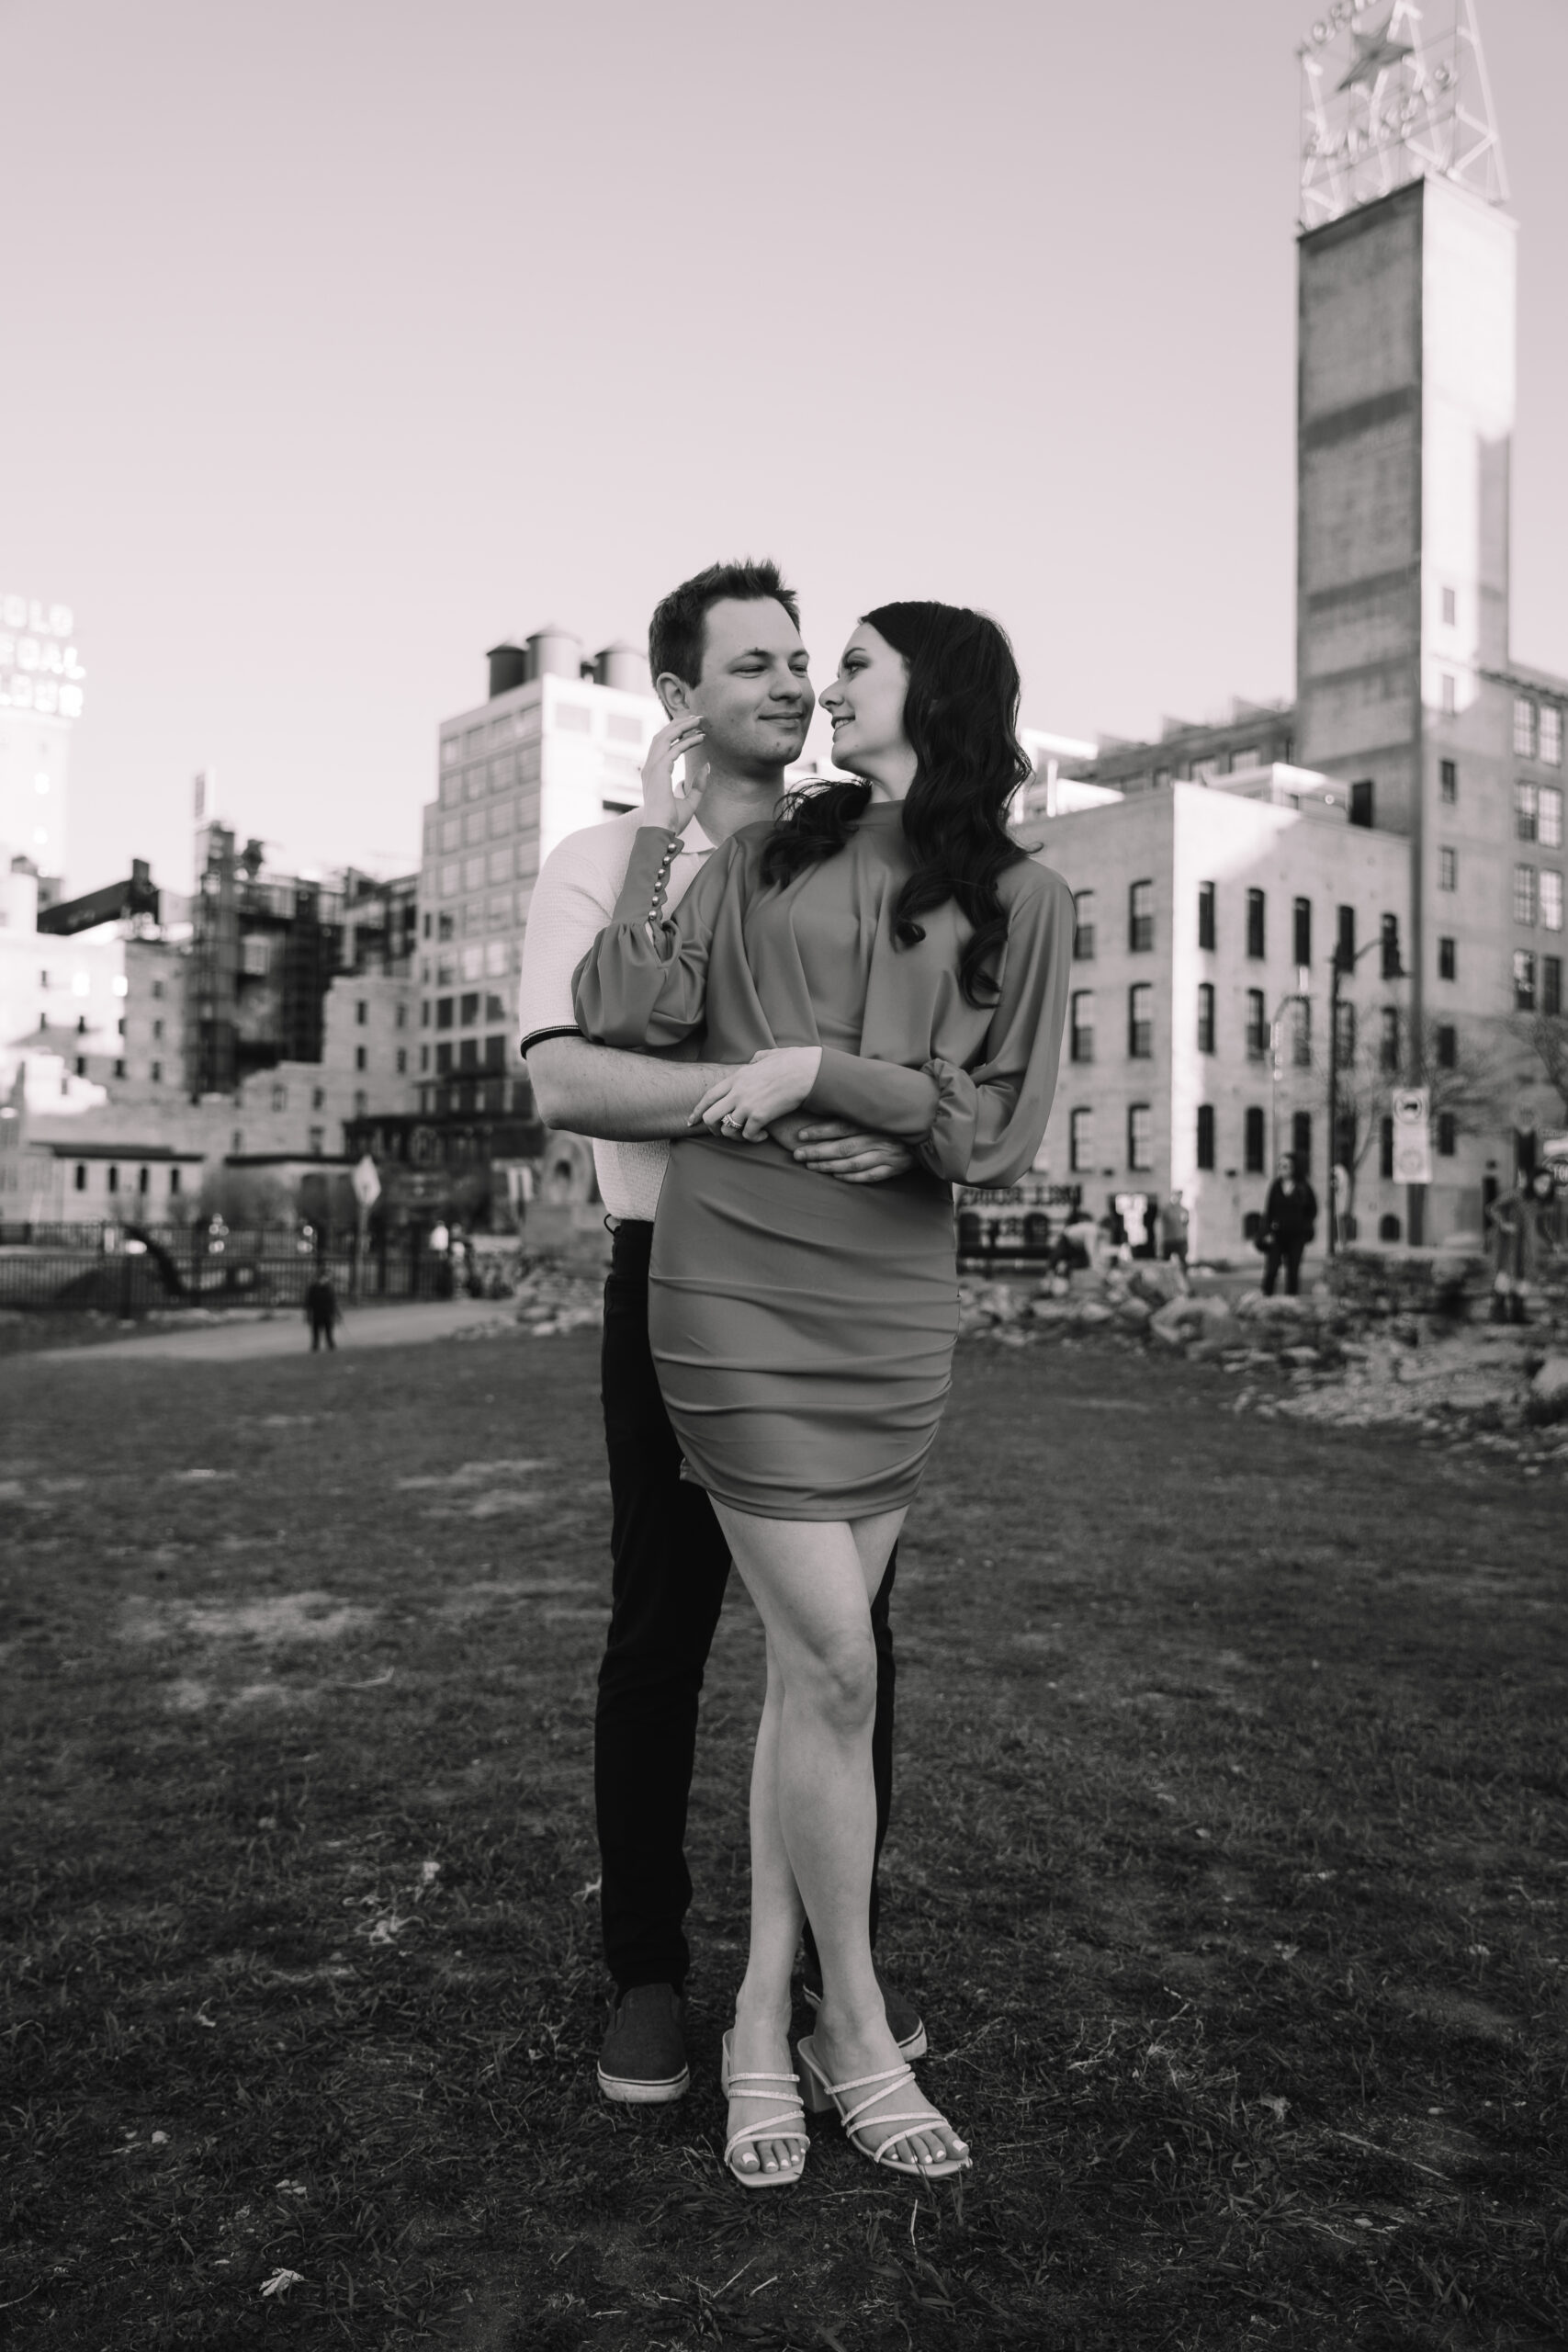 A man and woman stand together in an urban park with tall buildings in the background. The man stands behind the woman, both smiling, as he embraces her in a pose. The scene is in black and white.